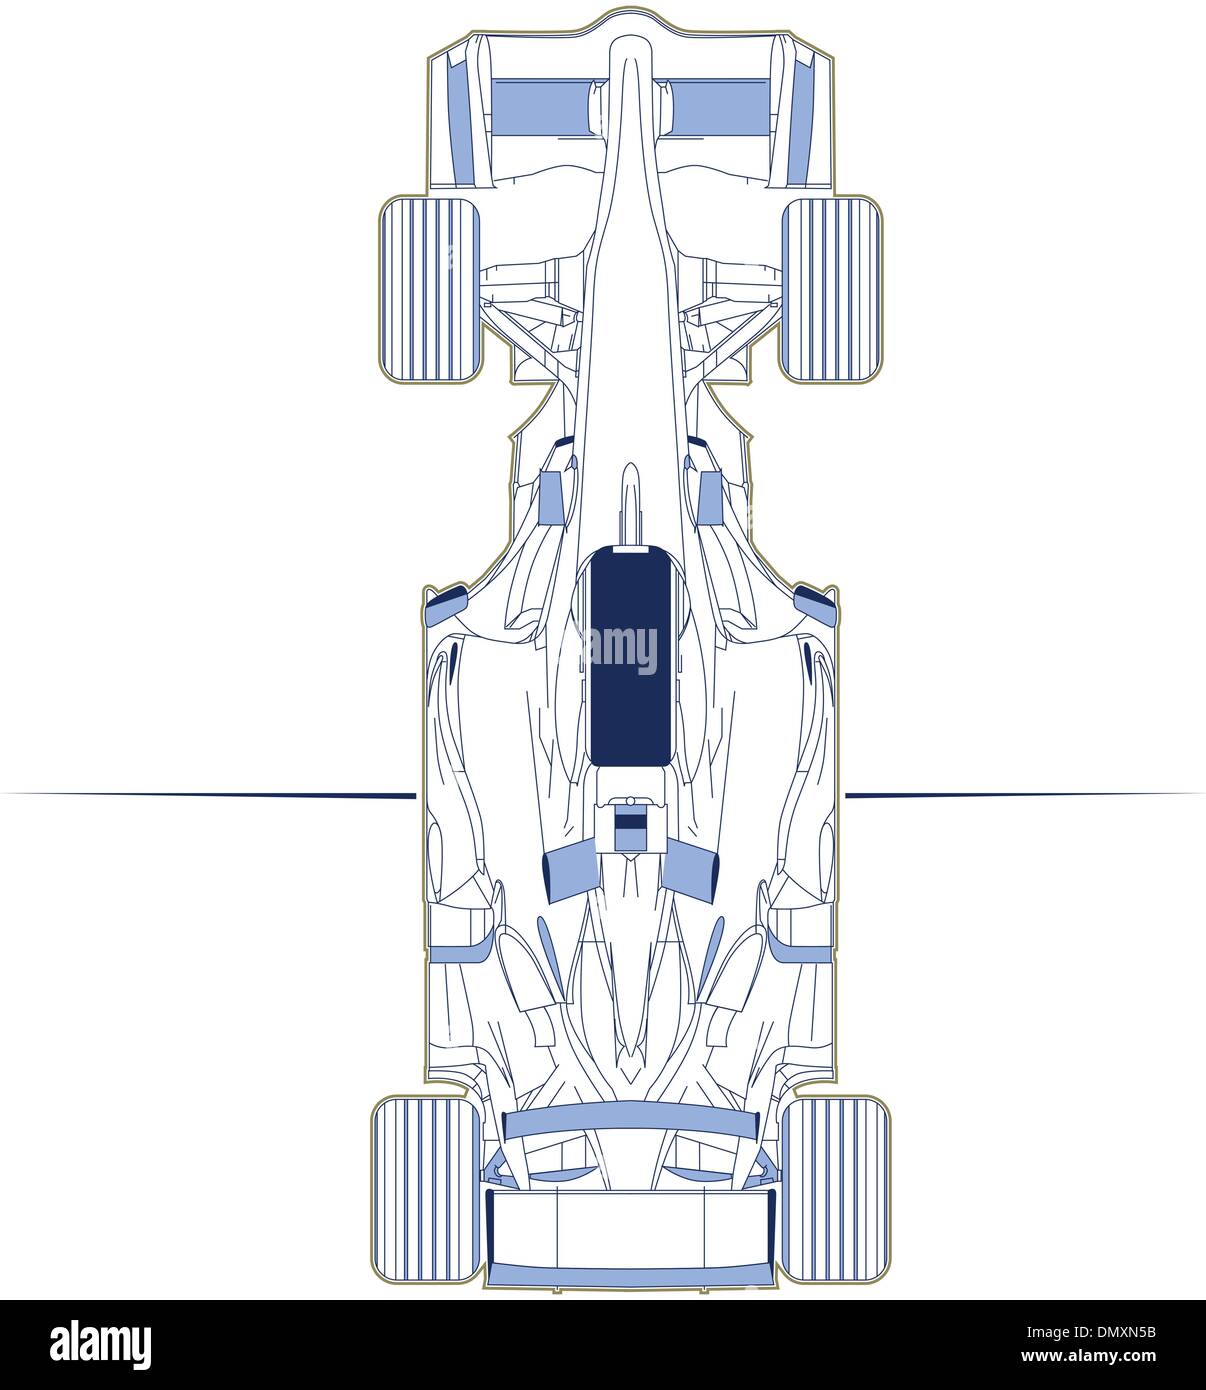 f1 car scheme top view Stock Vector Image and Art